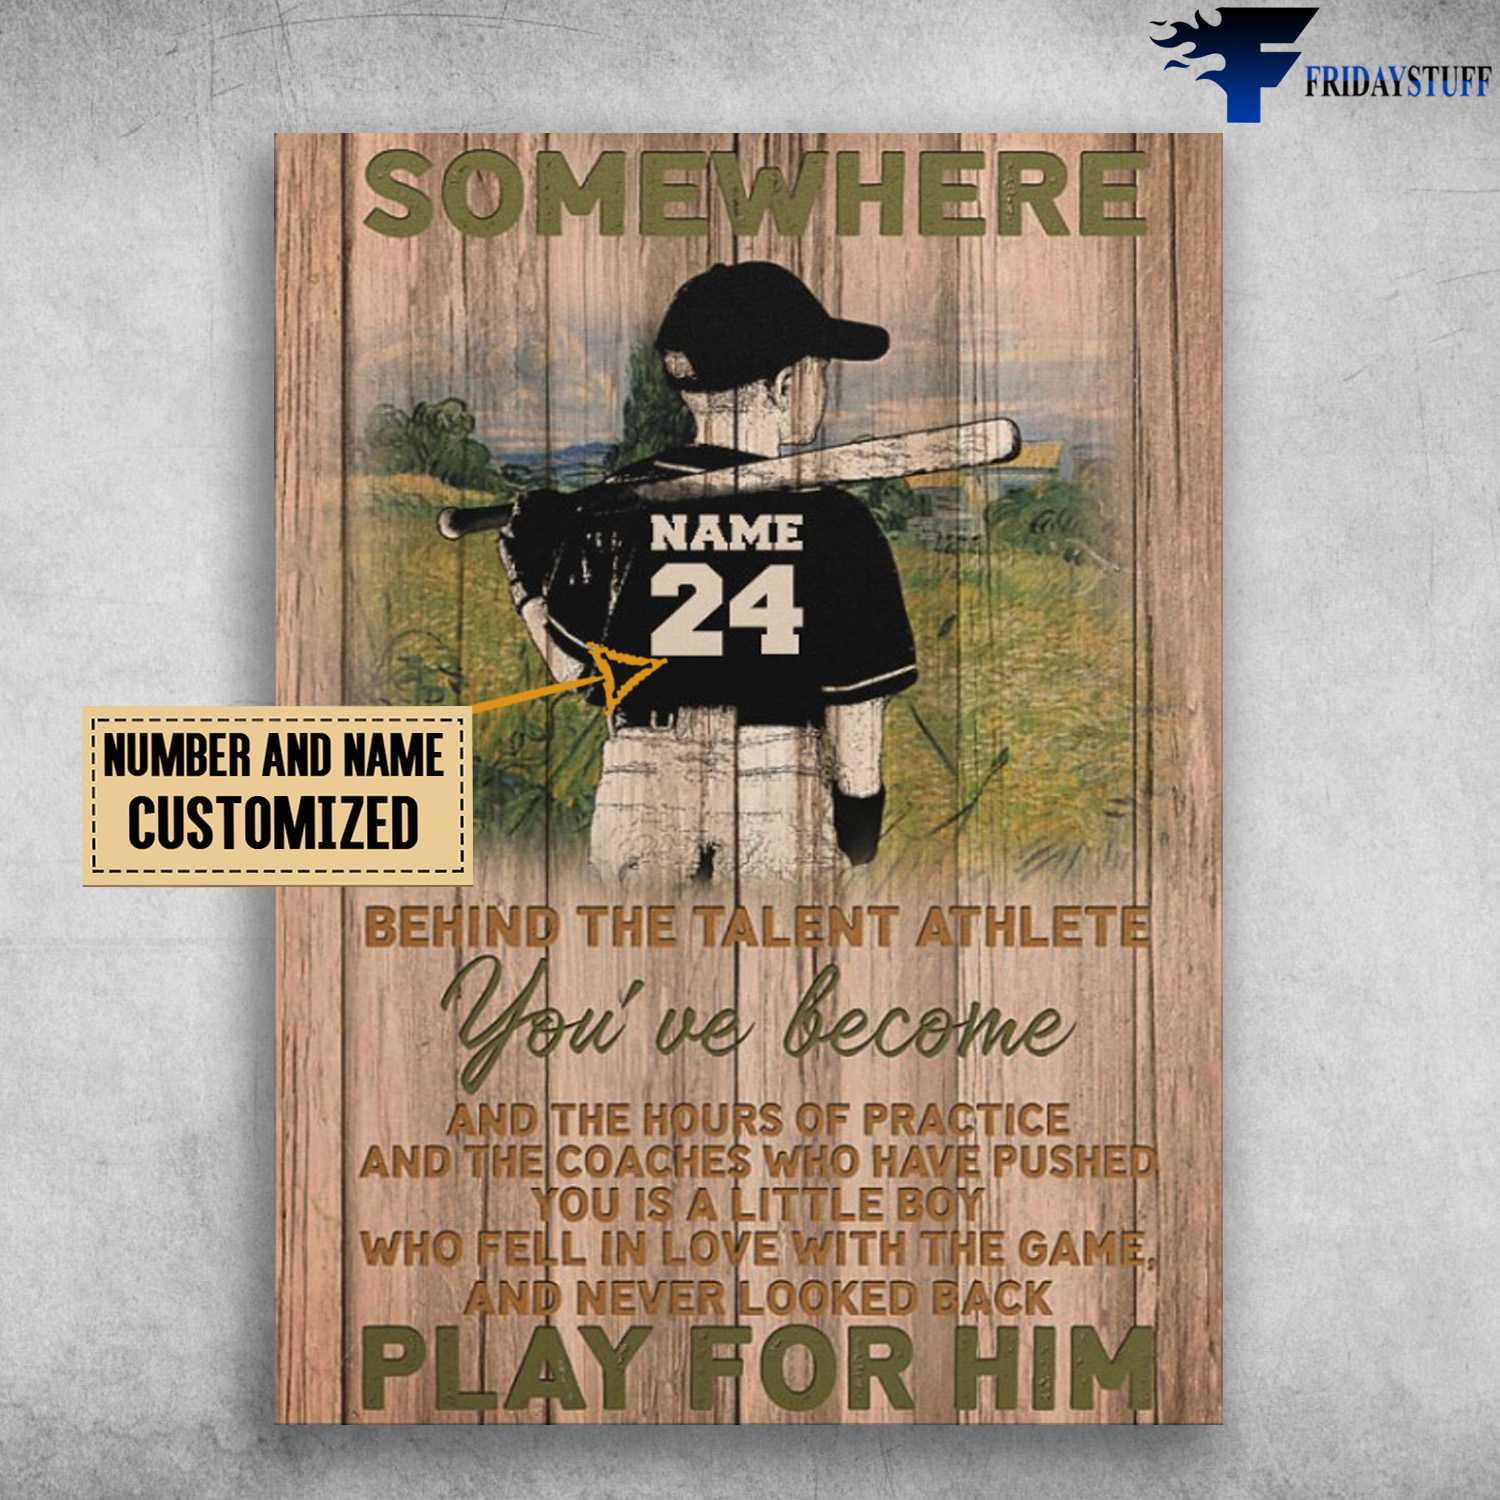 Baseball Poster, Somewhere Behind The Talent Athlete, You've Become, And The Hours Of Practice, And The Coaches Who Have Pushed